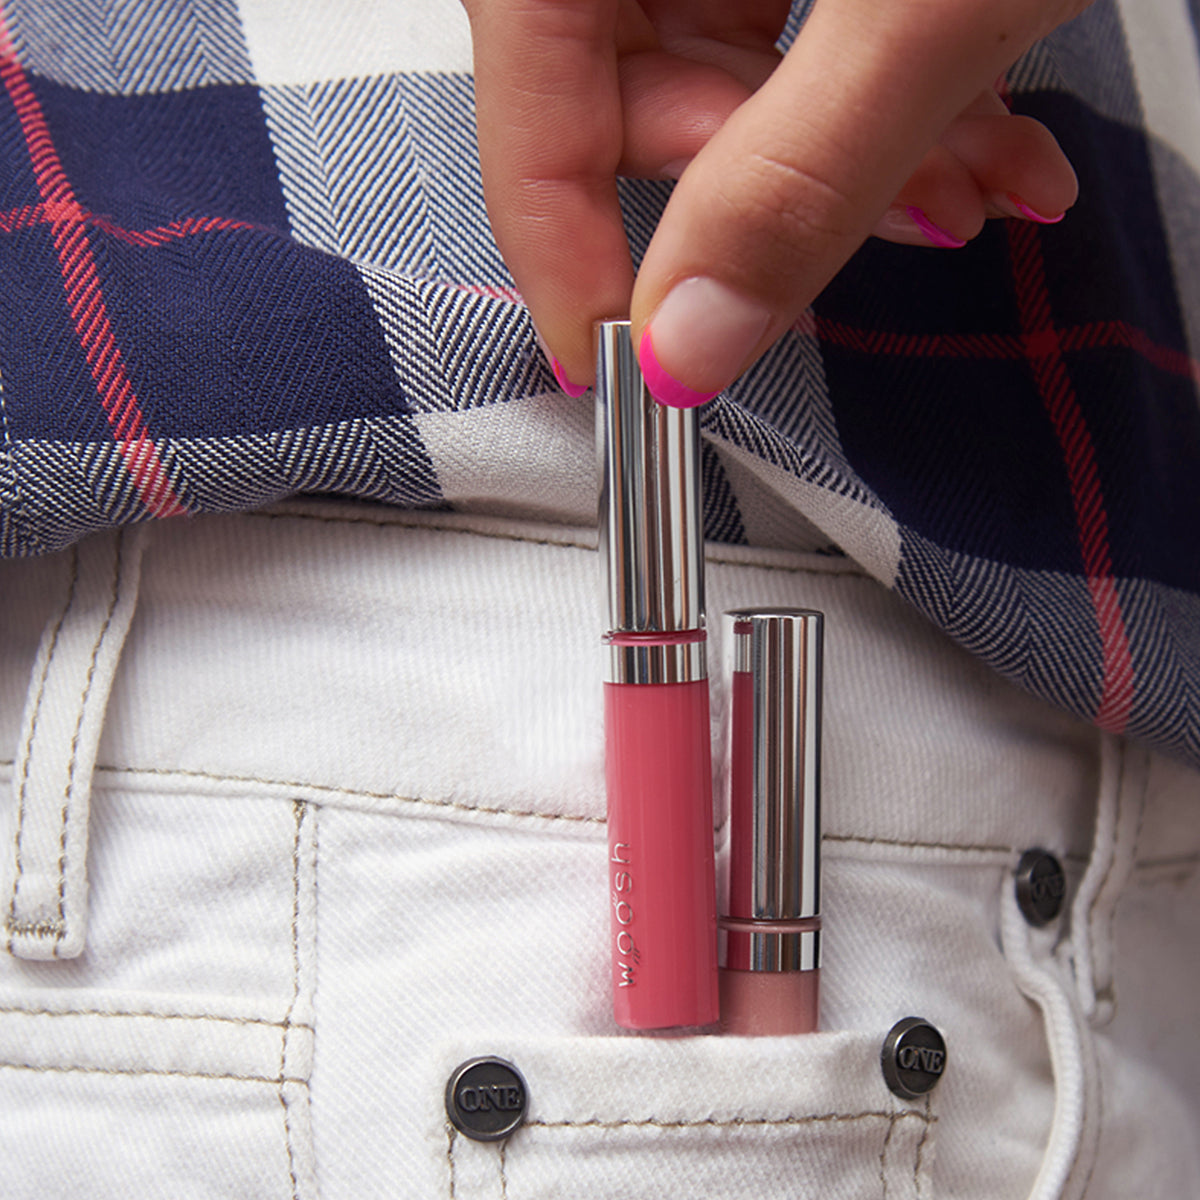 Model demonstrating the size of the mini lip gloss by putting both lip glosses in shades beige frosted and pink natural in small jean pocket